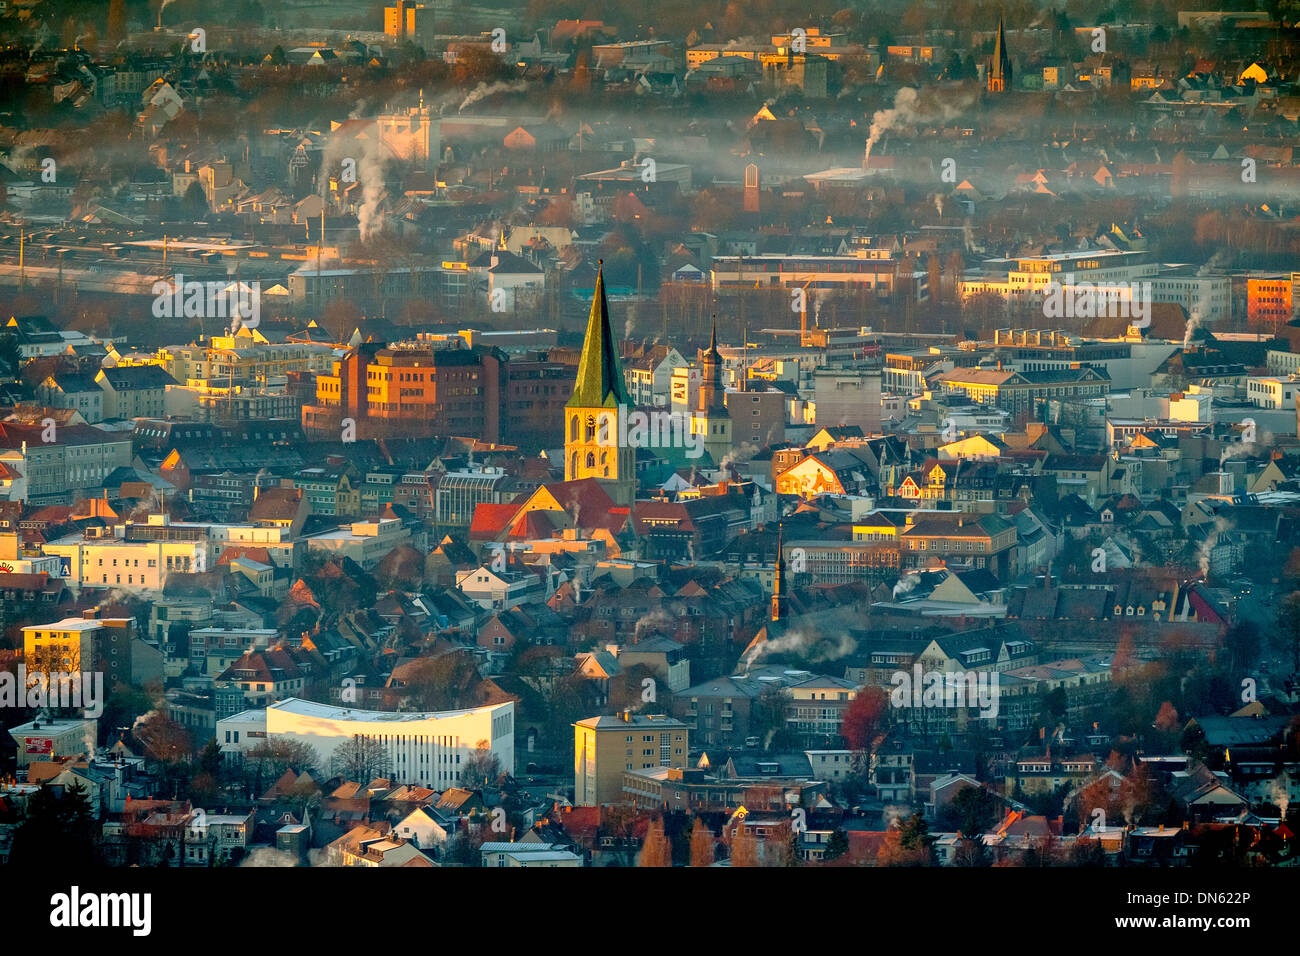 Aerial view, downtown with Protestant St. Paul's Church, morning light, Hamm, Ruhr area, North Rhine-Westphalia, Germany Stock Photo